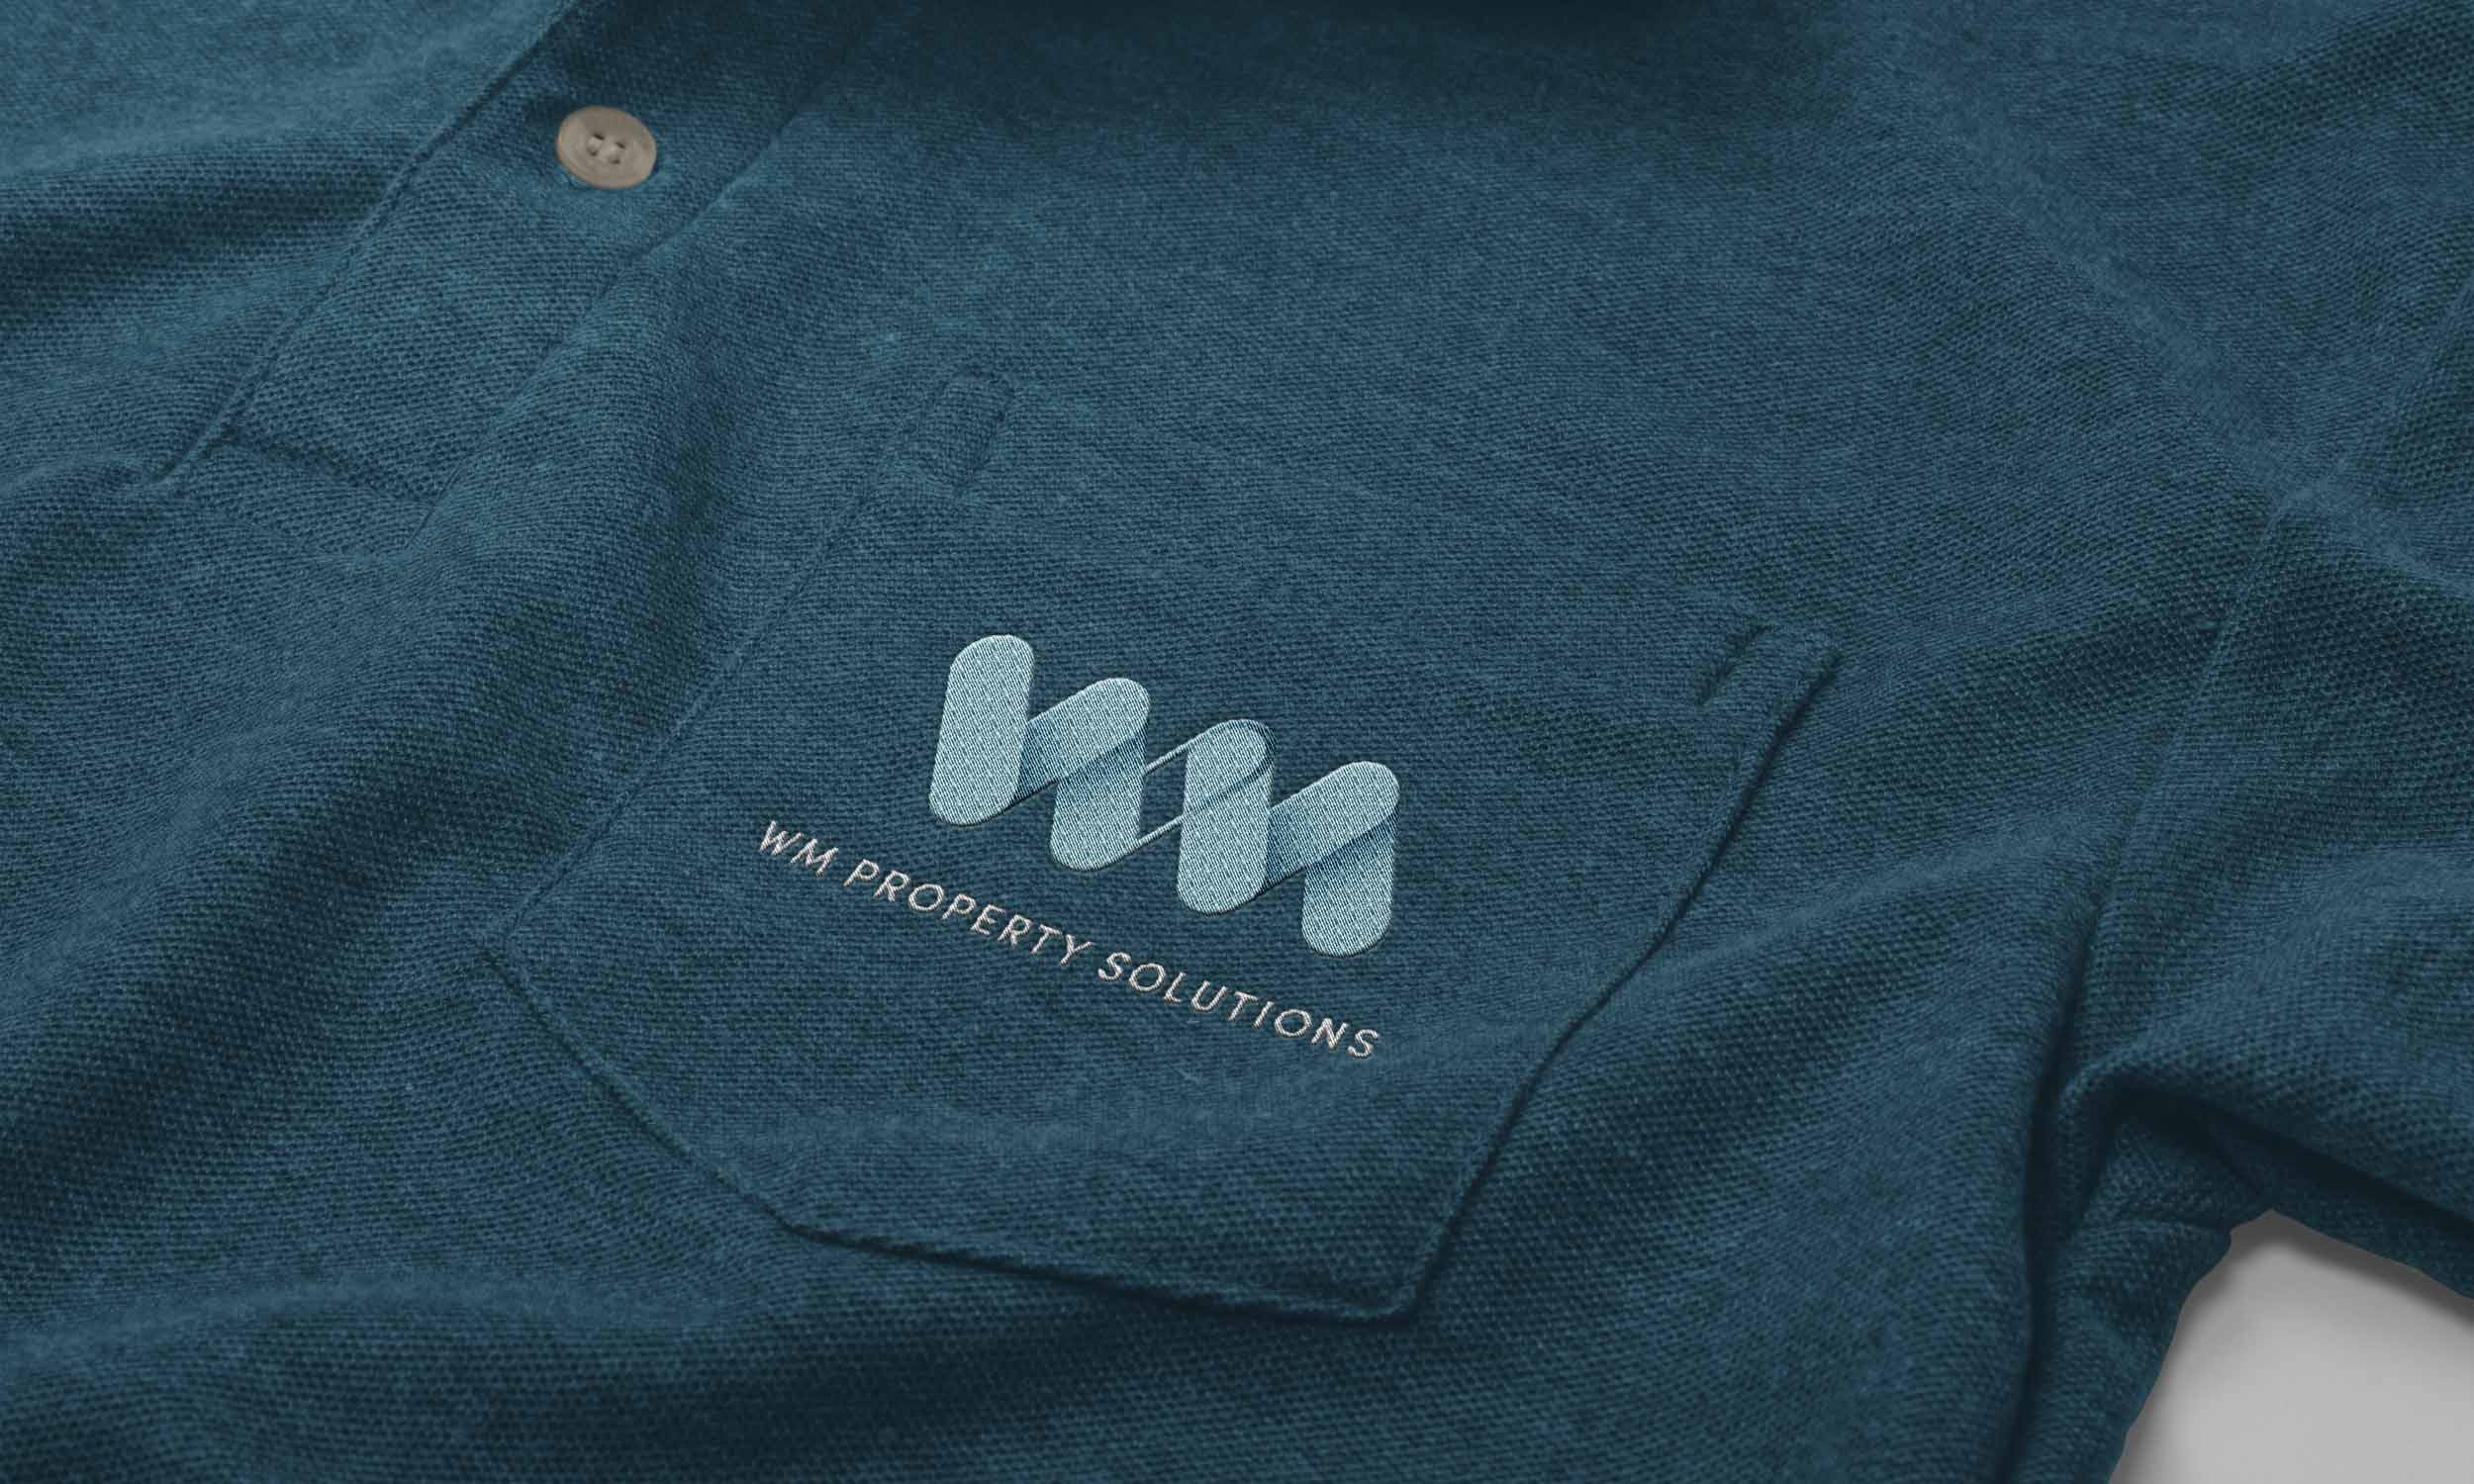 WM Property Solutions logo embroidered on shirt pocket